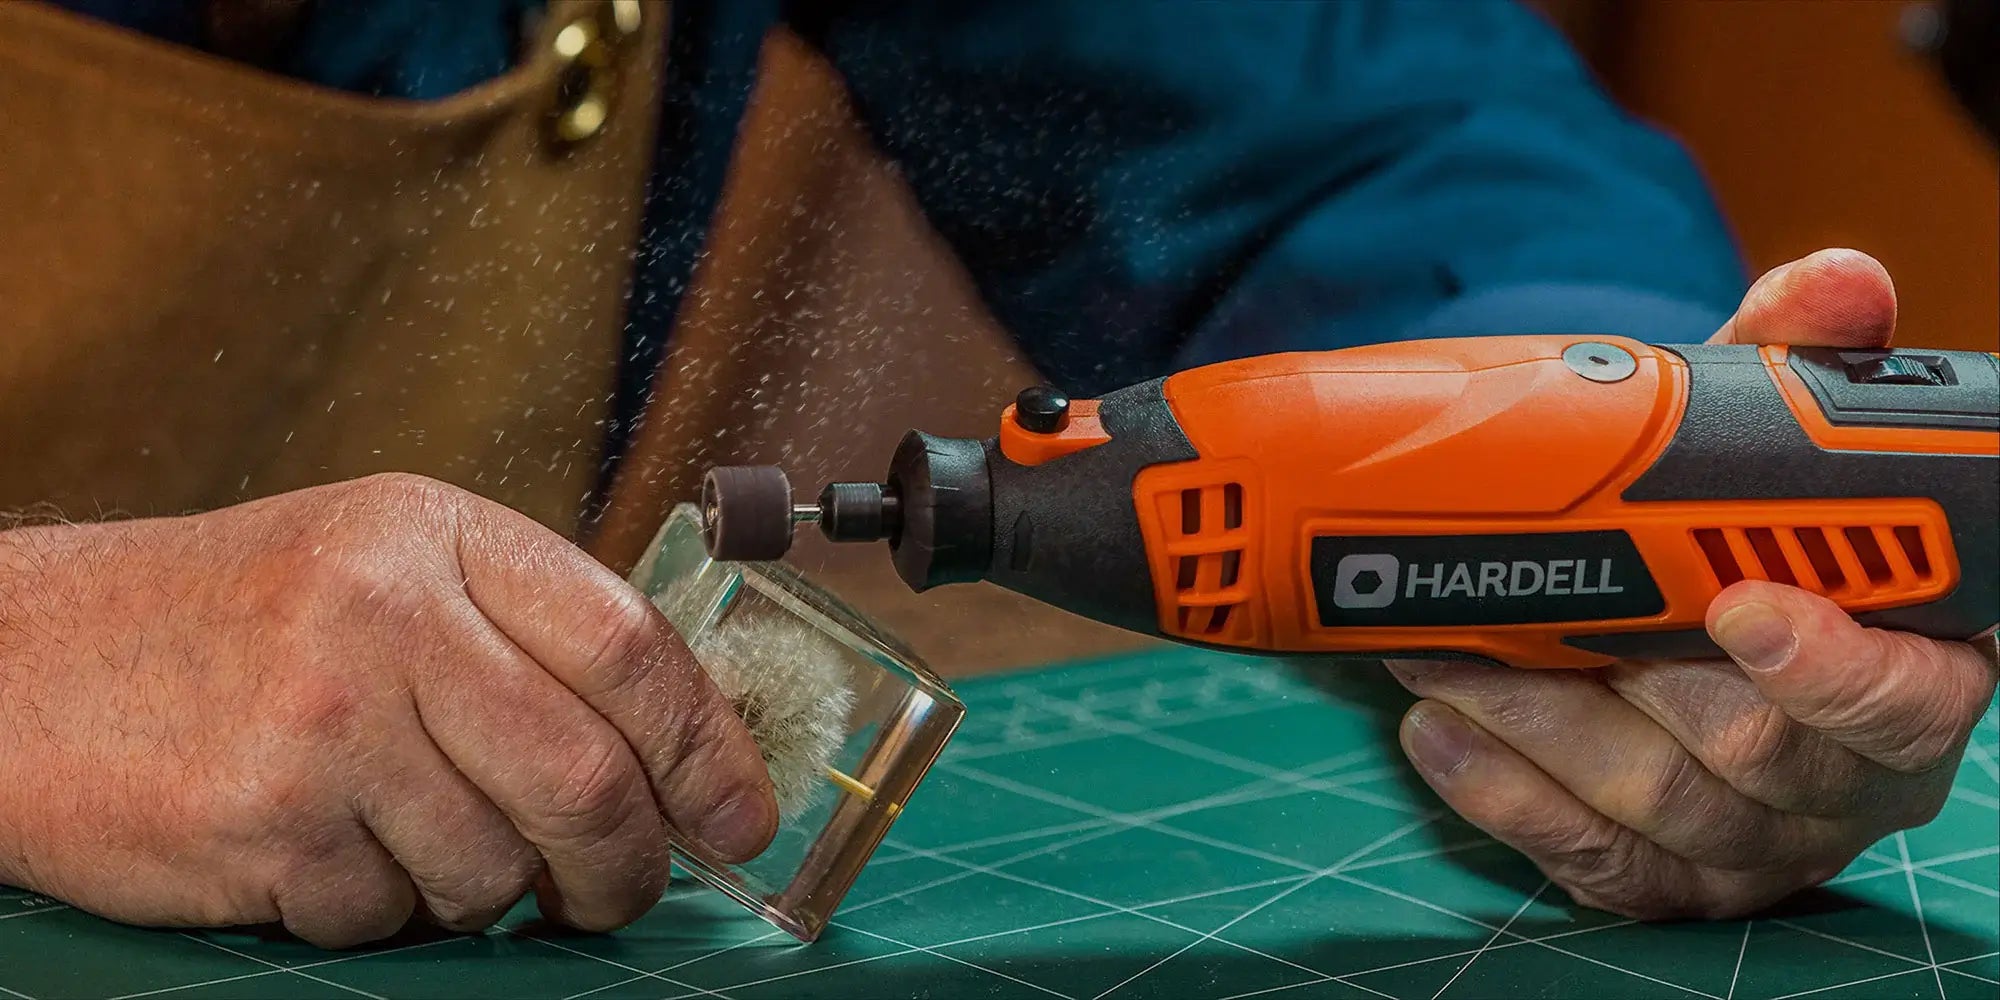 Hardell_3110_160W_Corded_Variable-Speed_Rotary_Tool_4